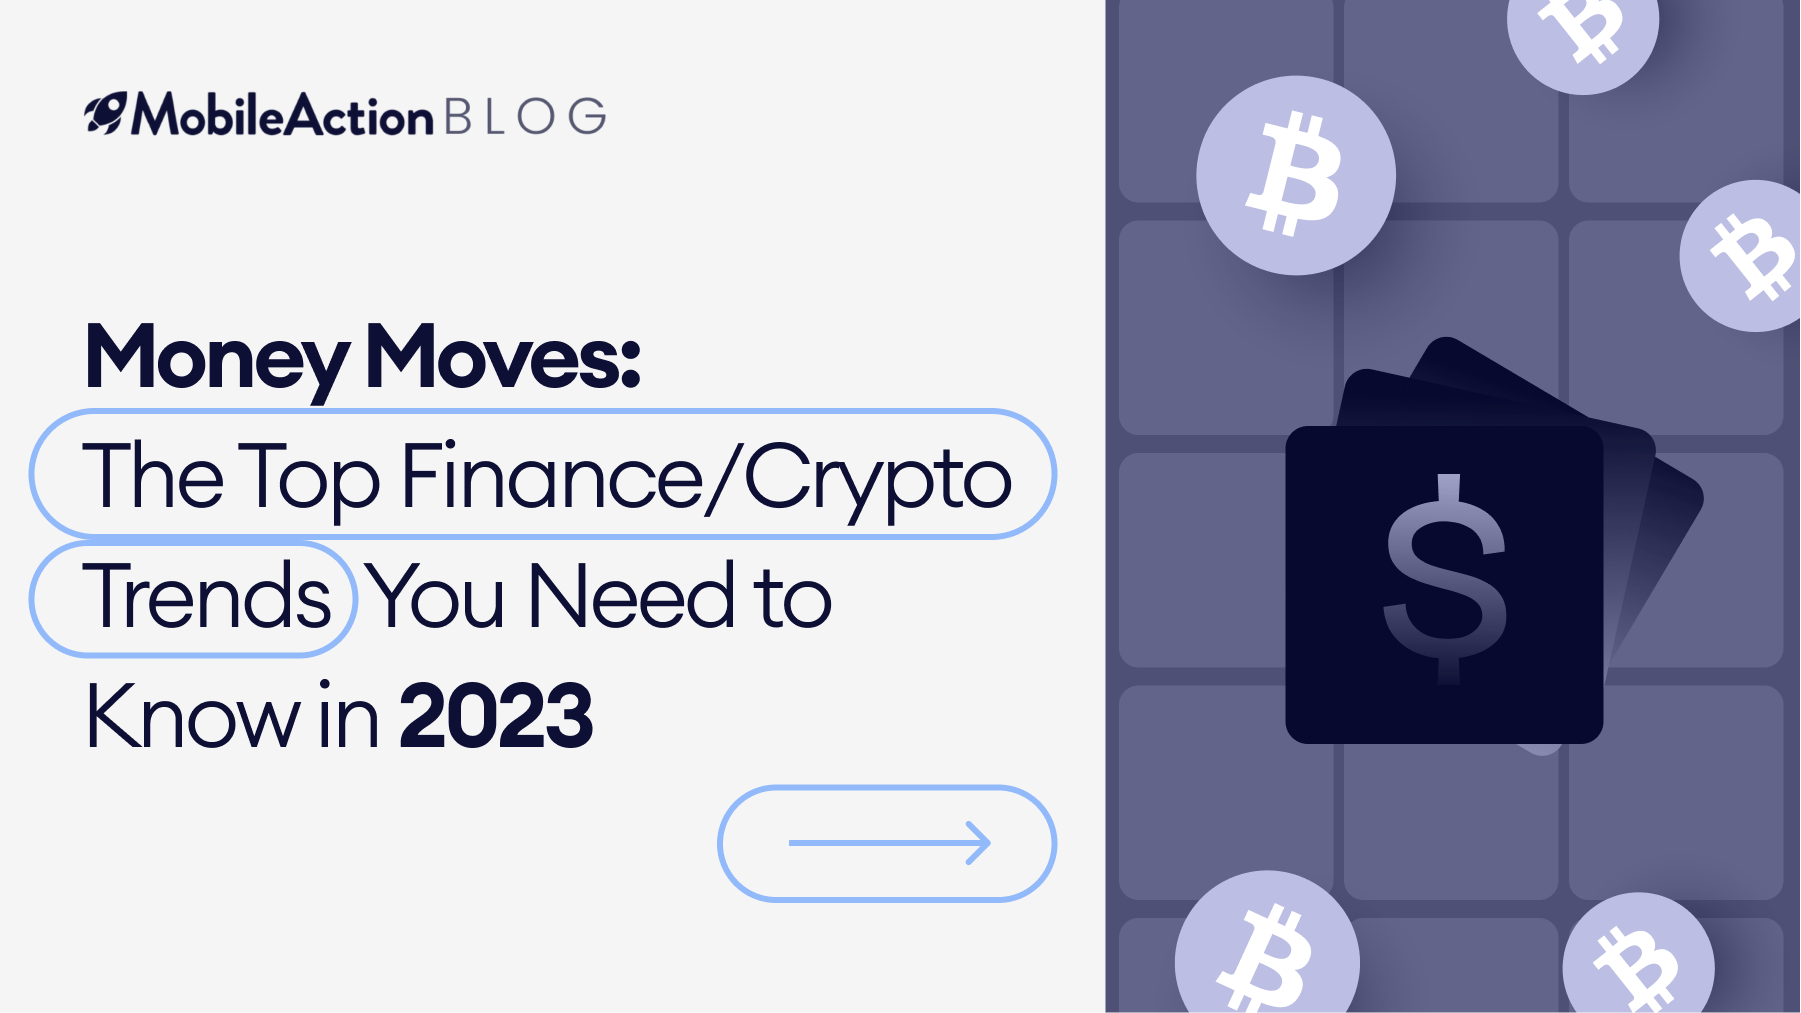 Money Moves: The Top Finance/Crypto Trends You Need to Know in 2023